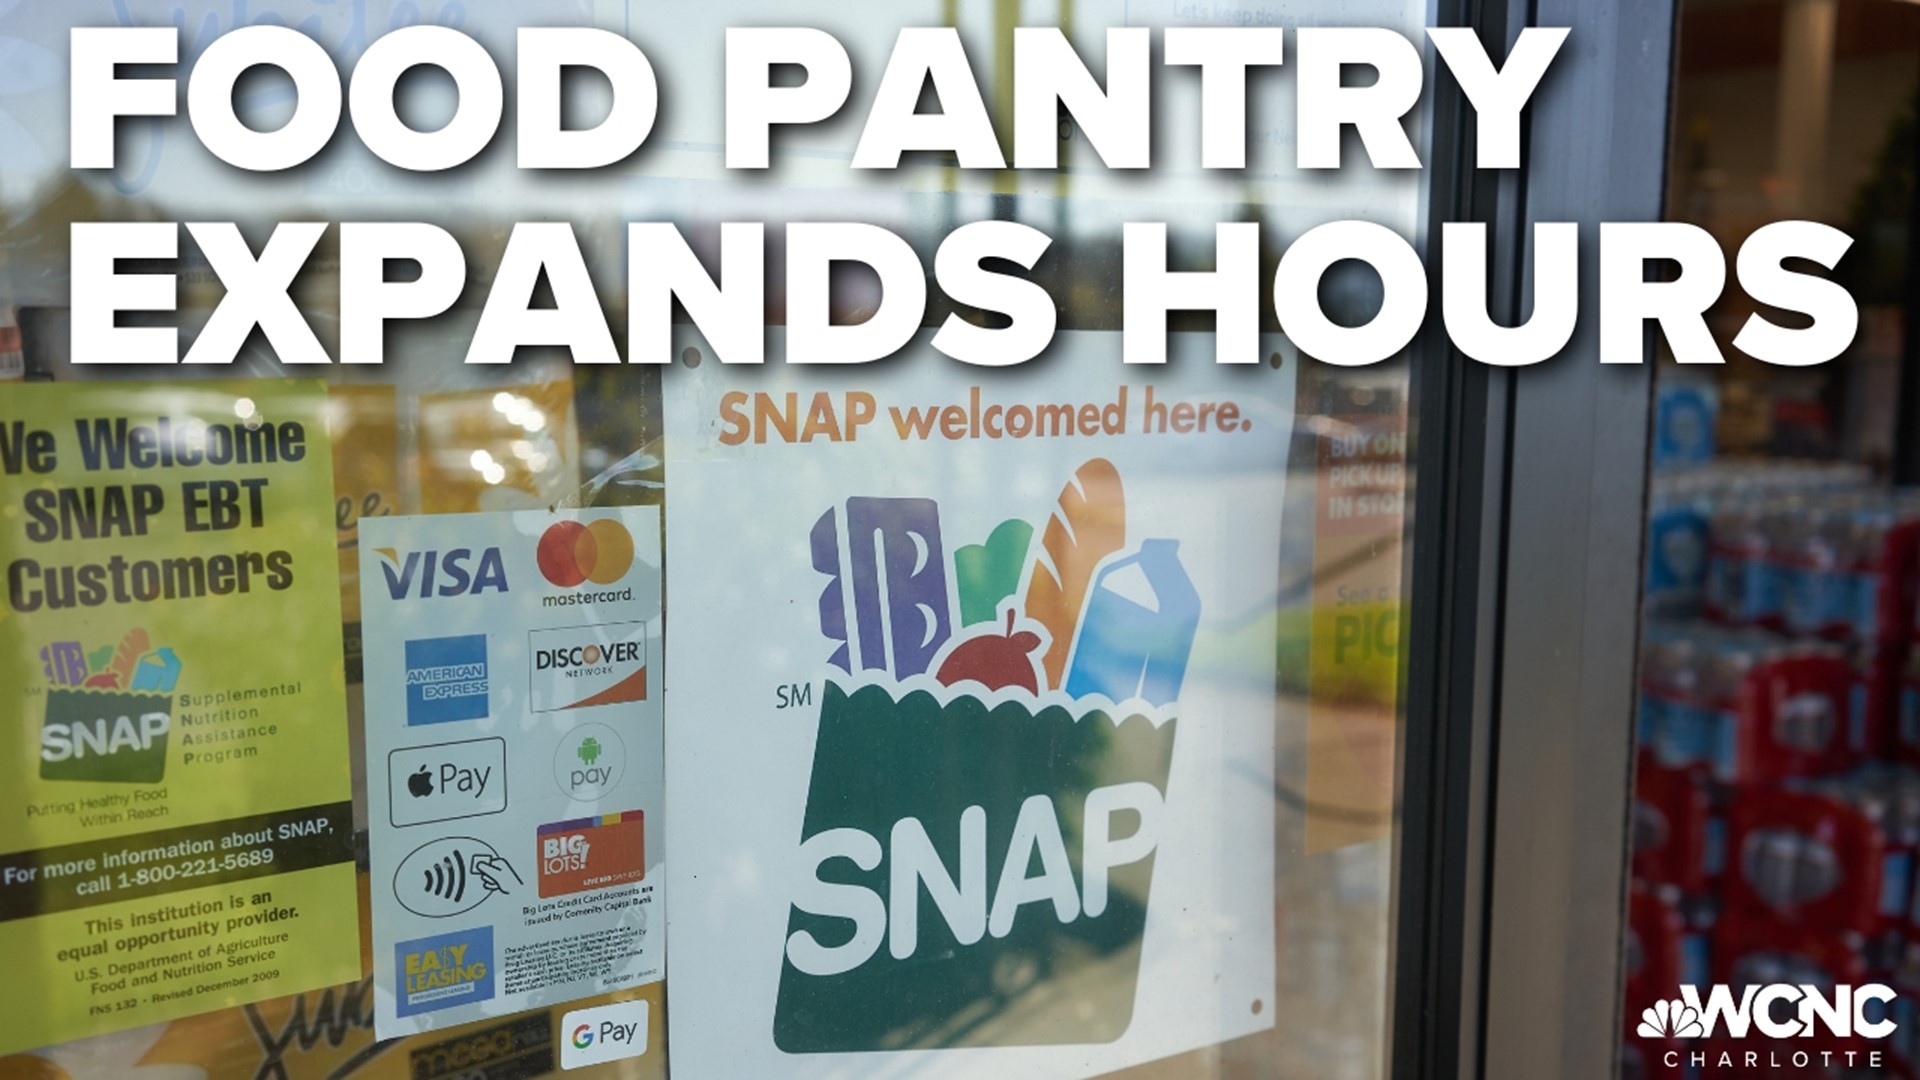 Some North Carolina residents are feeling the squeeze after emergency SNAP benefits ended this month.